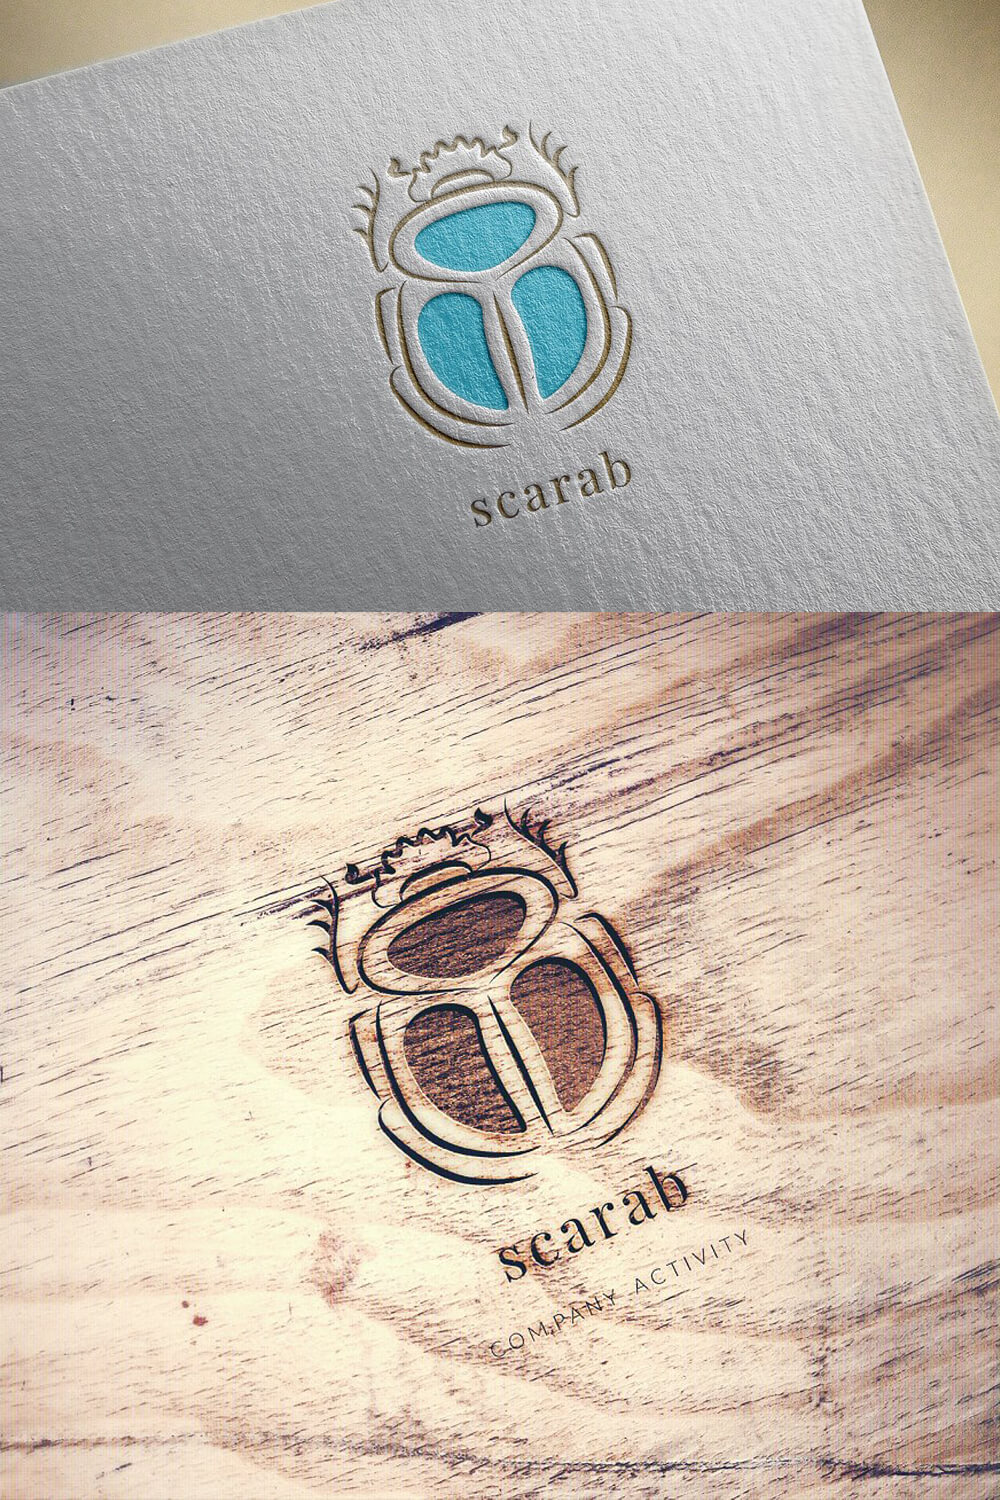 Two logos with images of skorobei on paper and wooden backgrounds.